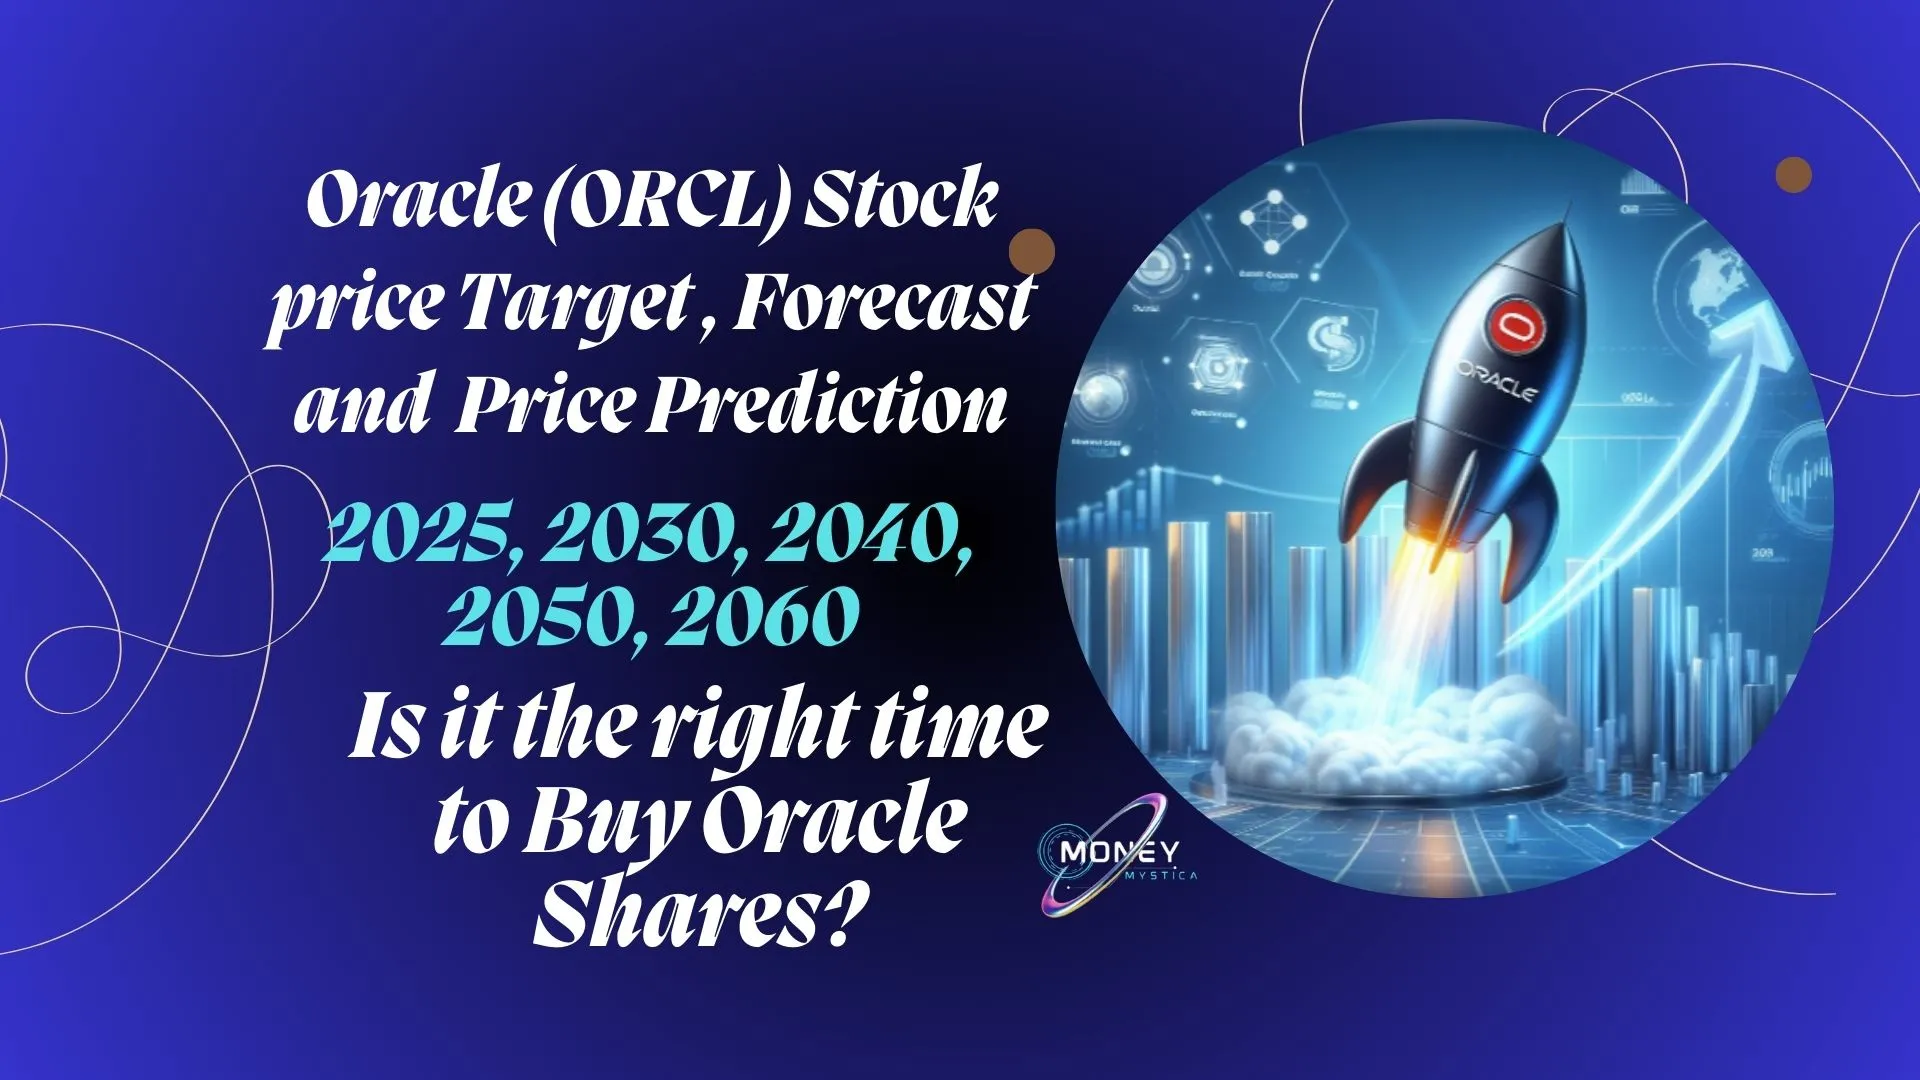 Oracle (ORCL) Stock Price prediction and share forecast for 2024, 2025, 2030, 2040, 2050